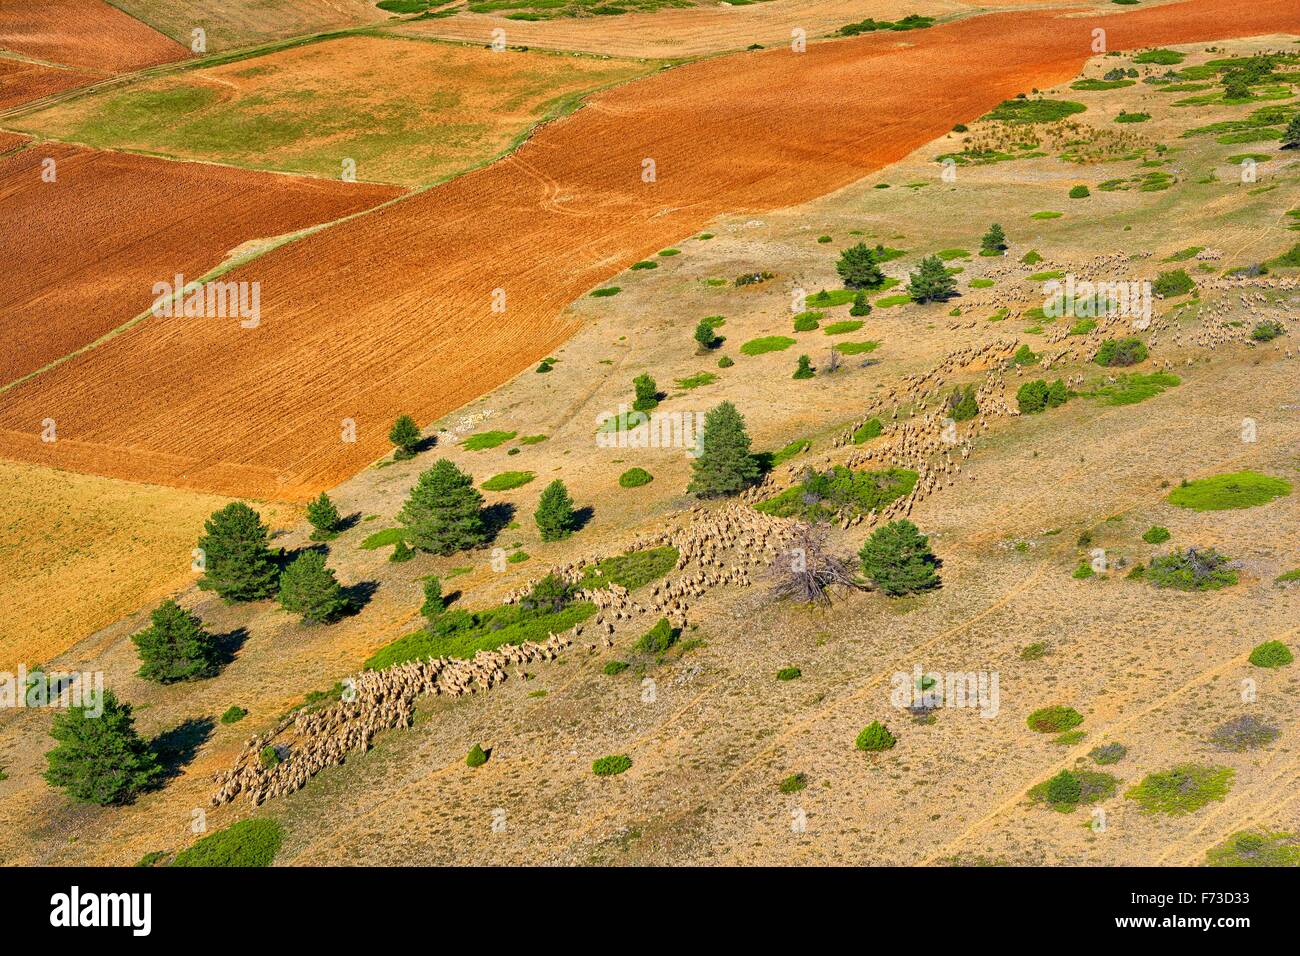 Transhumance with sheep in the Iberian Peninsula (Spain). From Cuenca to Extremadura Stock Photo